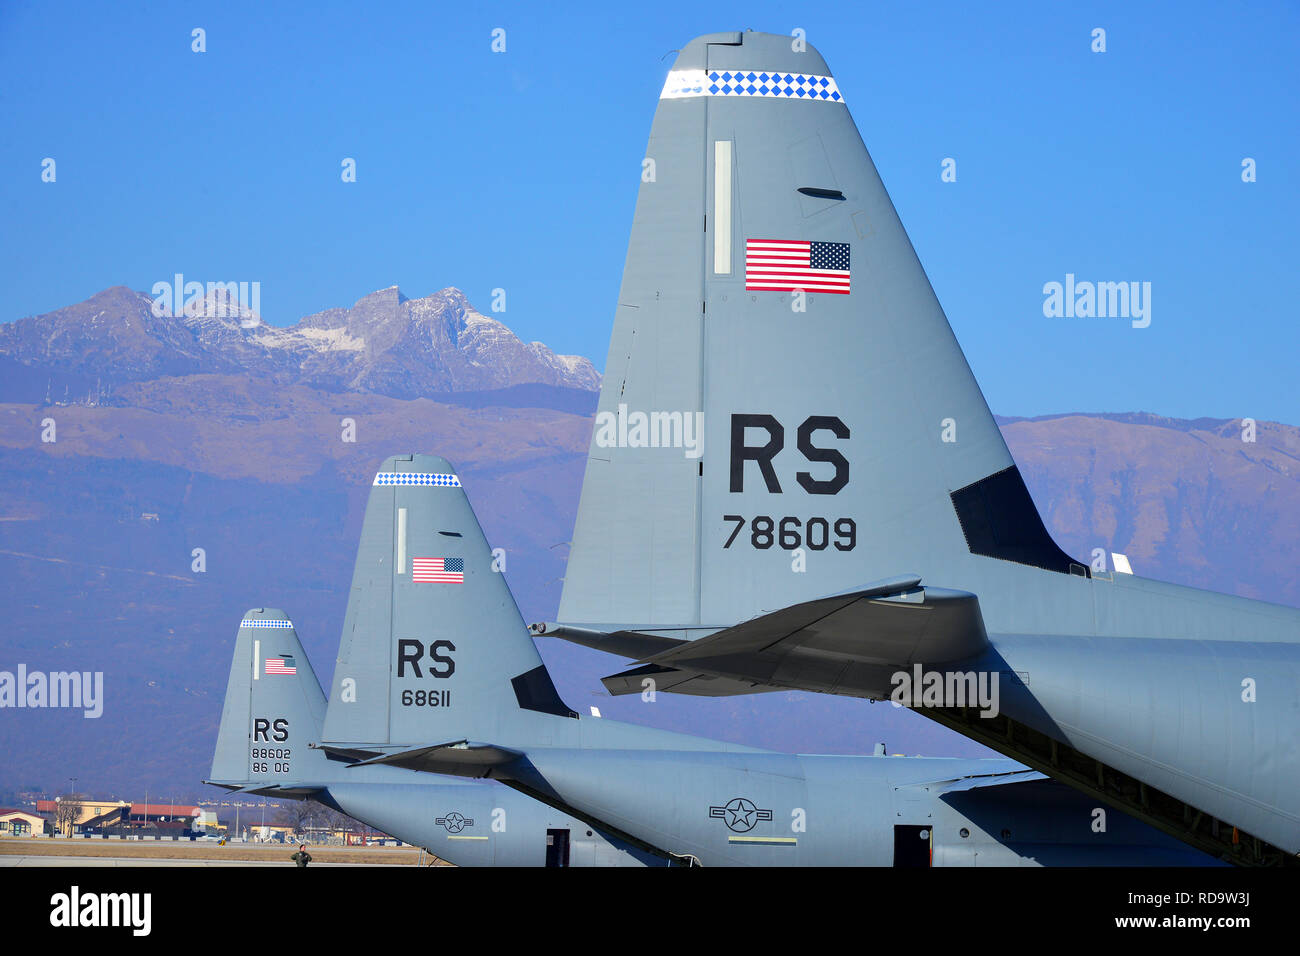 U.S. Air Force C-130 Hercules from the 86th Air Wing park at Aviano Air Base, Italy, January 14, 2019, during Spartan Exercise. (U.S. Army photo by Paolo Bovo) Stock Photo